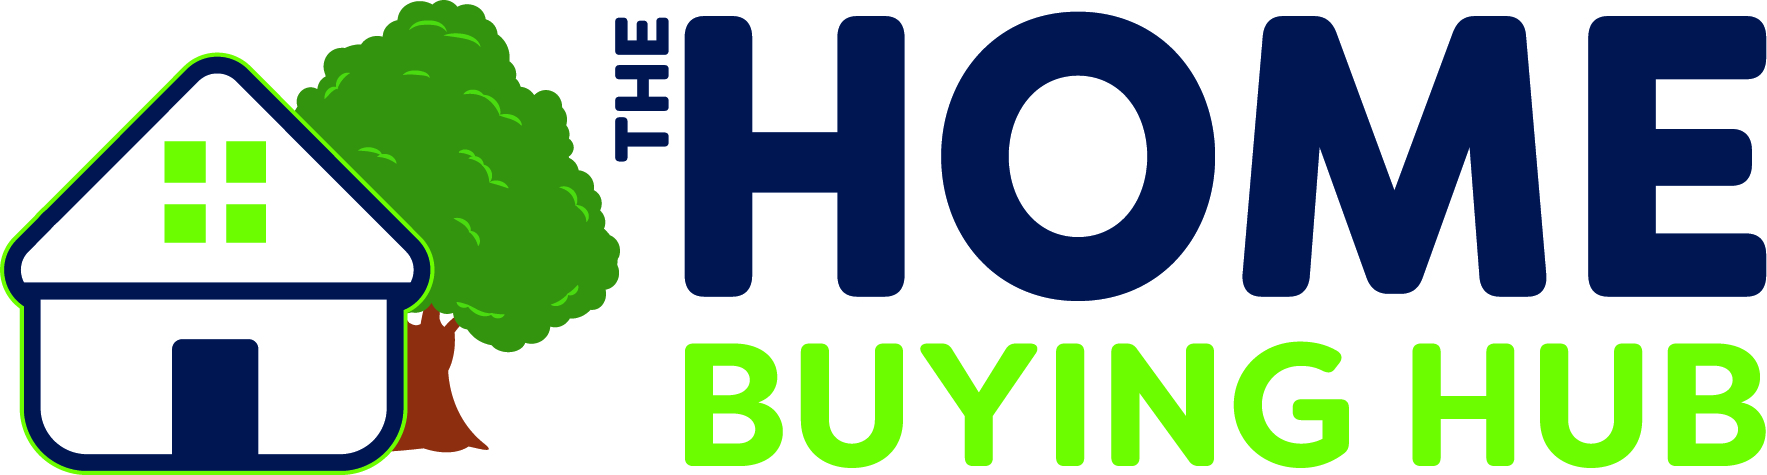 The Home Buying Hub: Tips on Buying a House & Selling a House